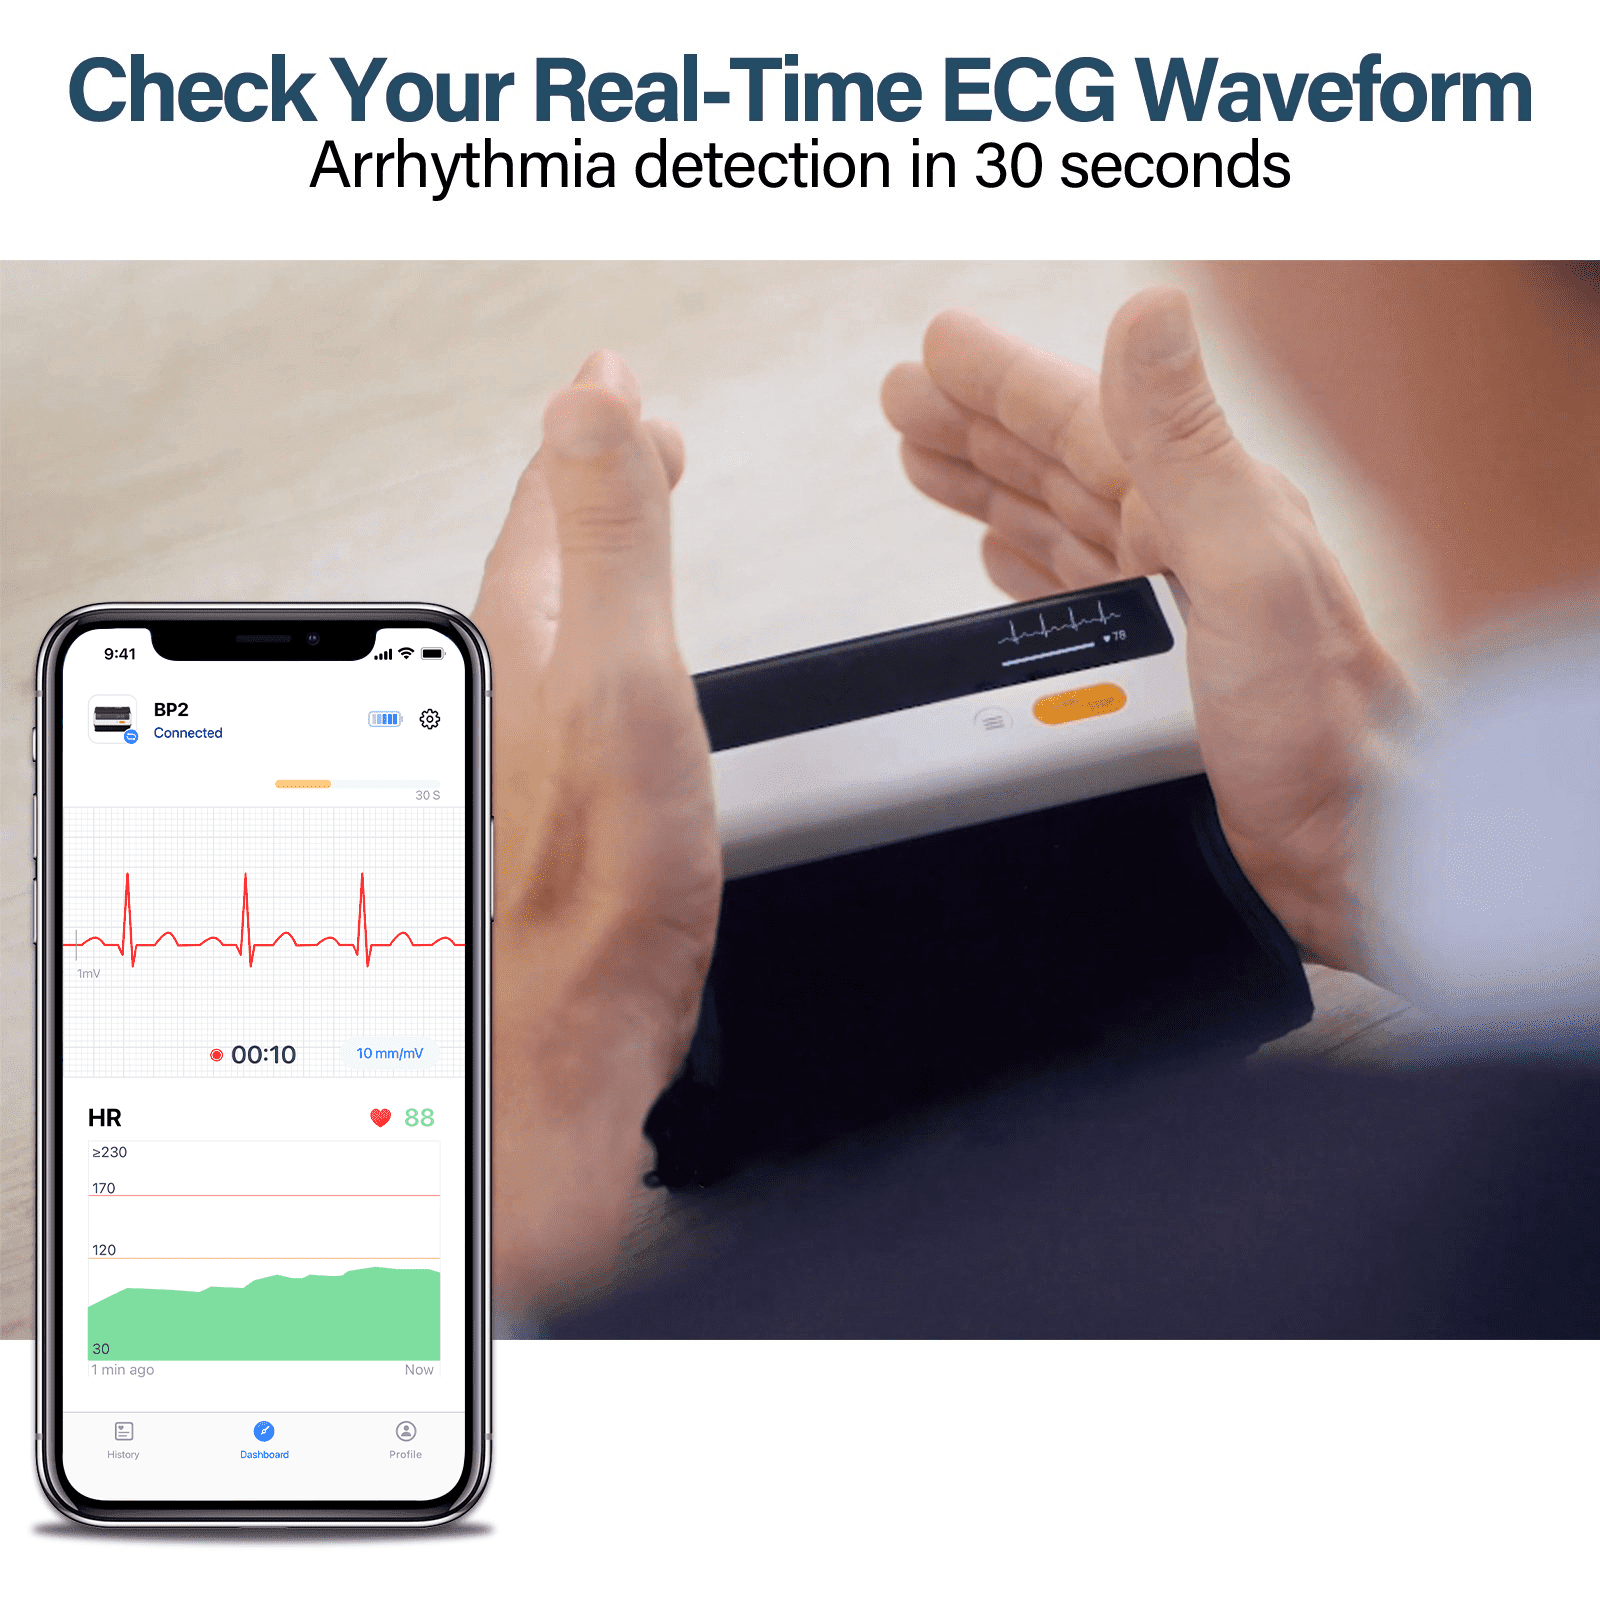 Wellue Blood Pressure Monitors with AI EKG Analysis,2 in 1 Upper Arm BP  Machine Cuff Kit and ECG Monitor for Home Wellness Use,BP2 Connect